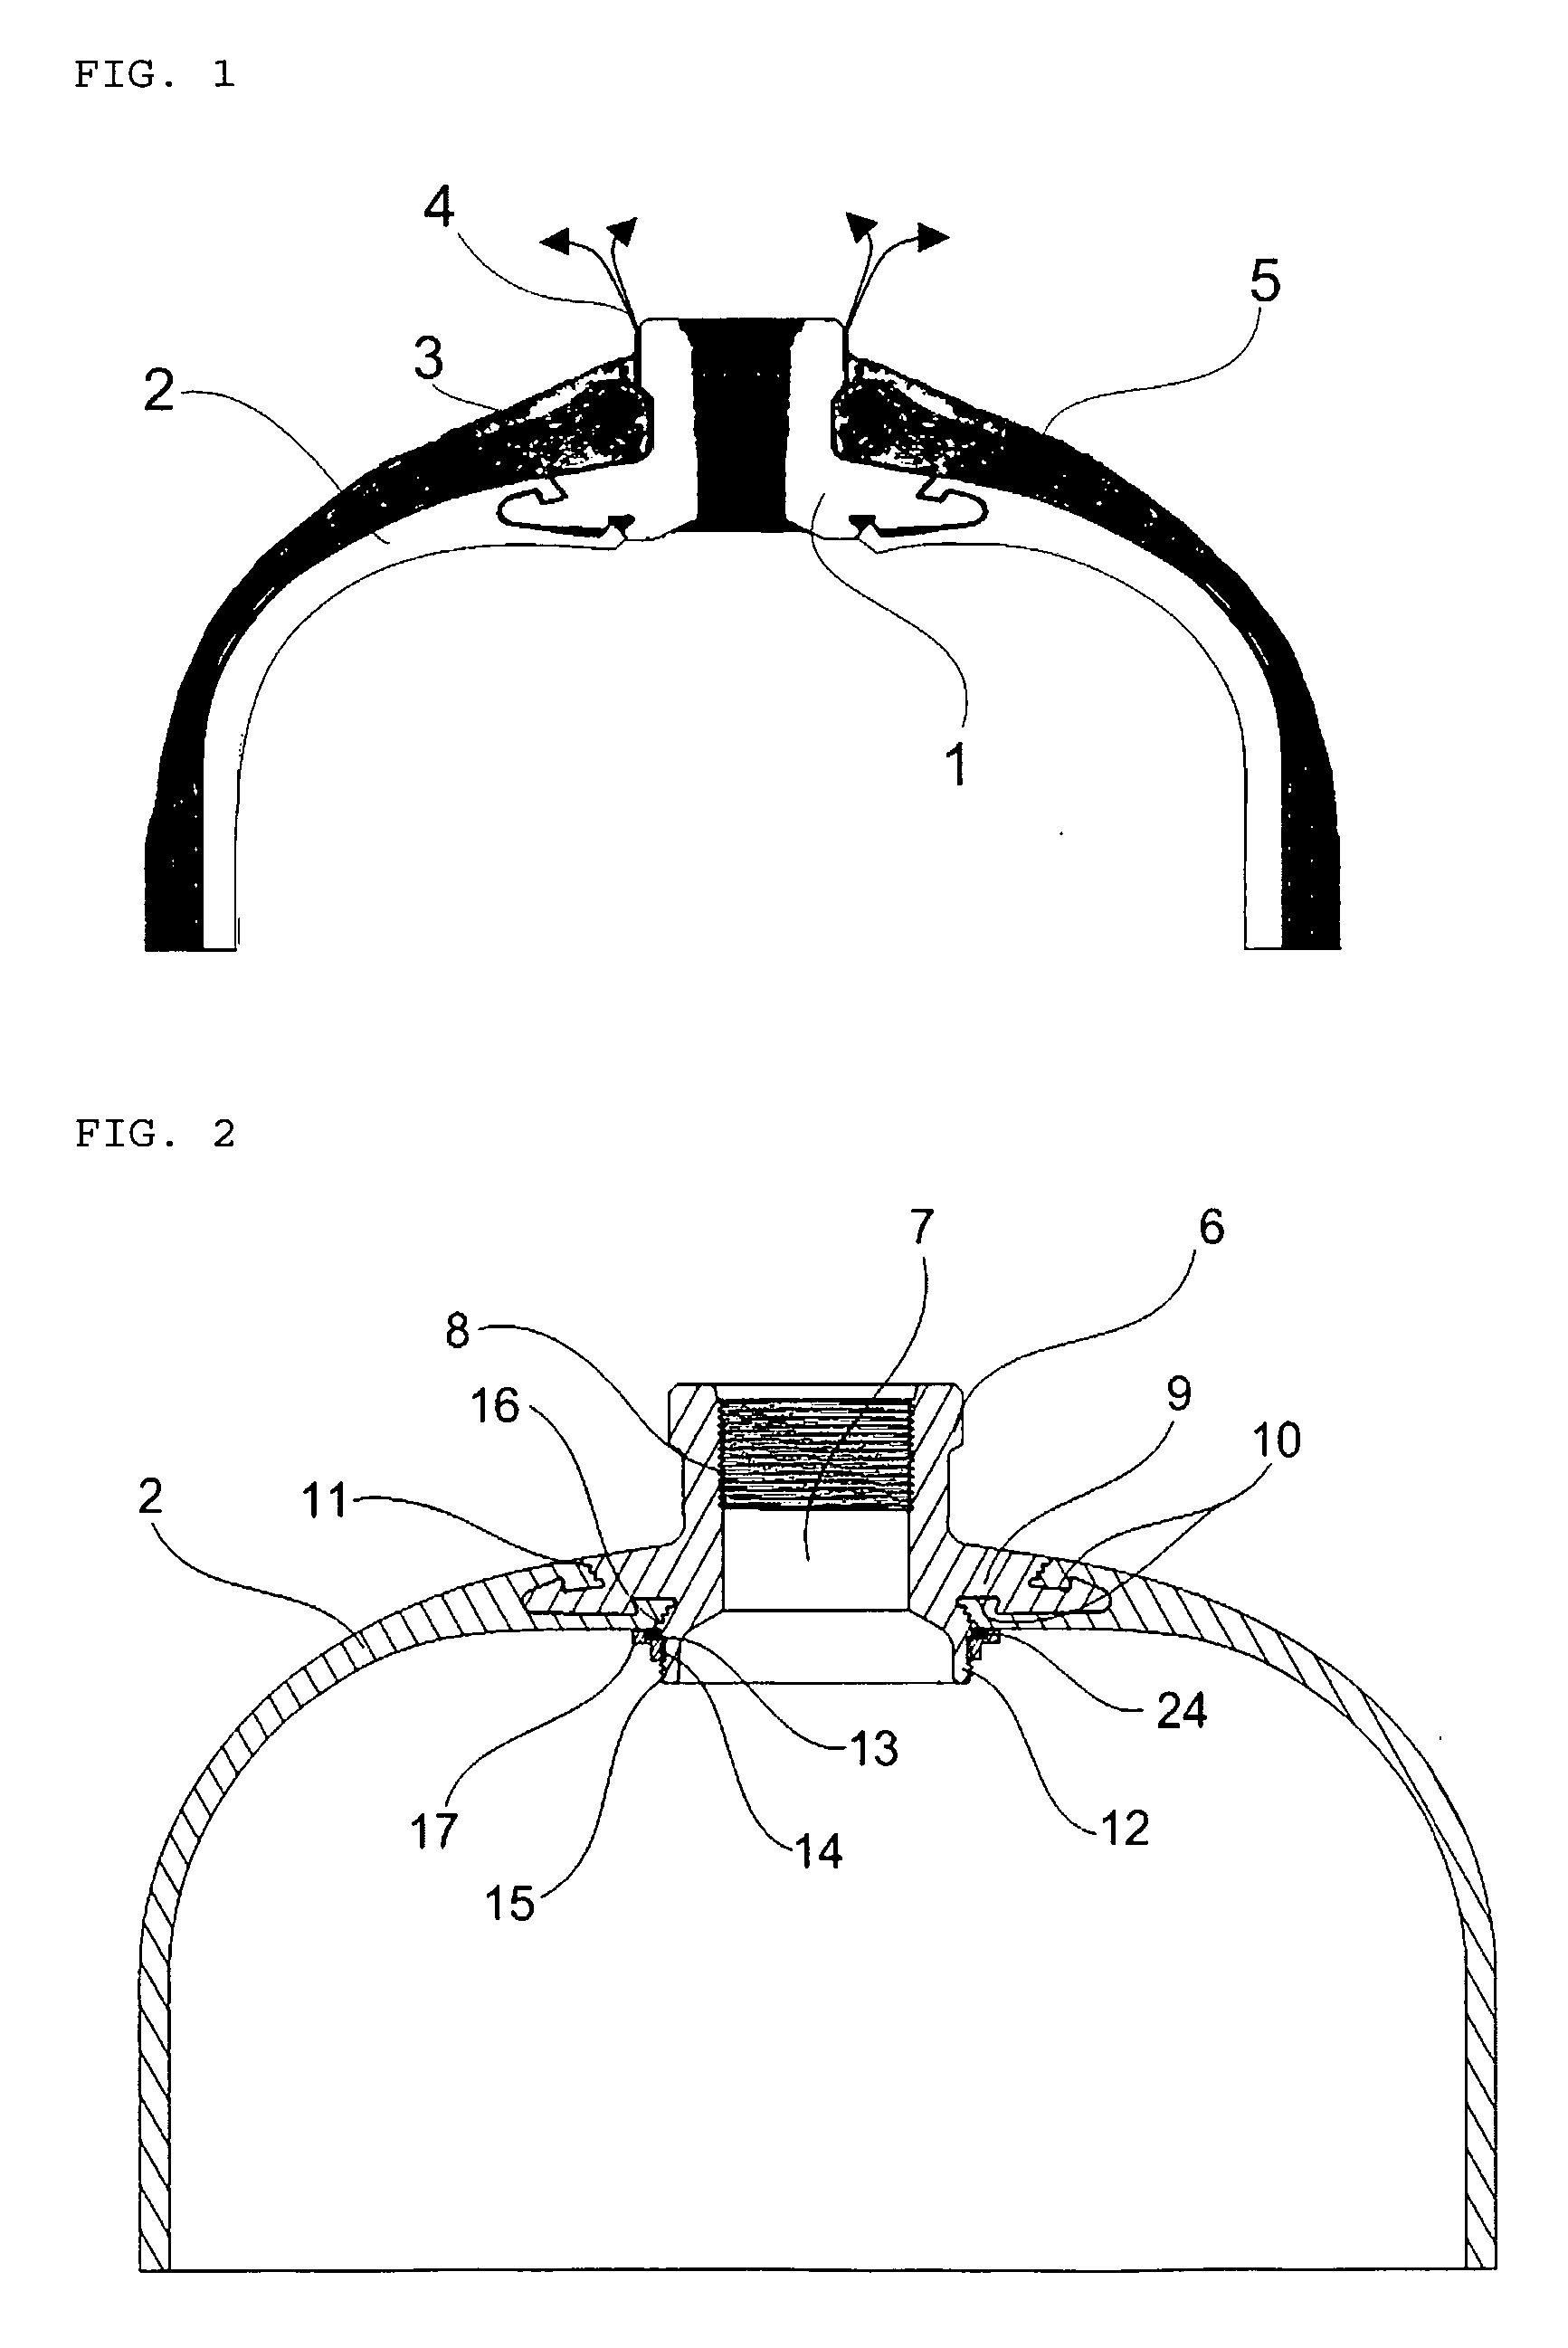 High gas-tightened metallic nozzle-boss for a high pressure composite vessel